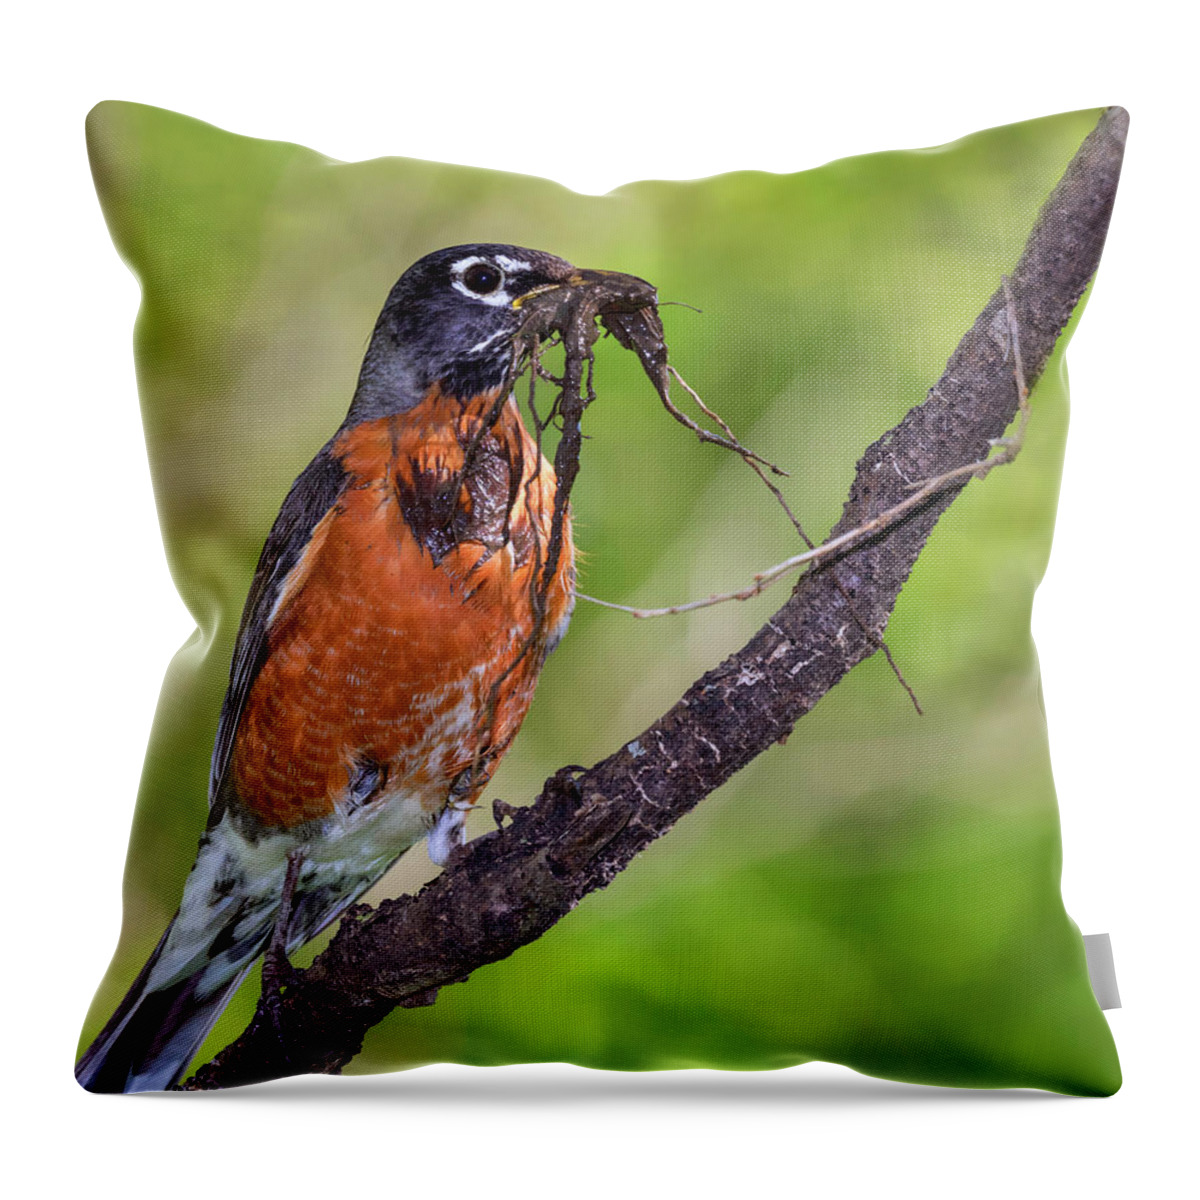 America Throw Pillow featuring the photograph American Robin With Nesting Material by Ivan Kuzmin